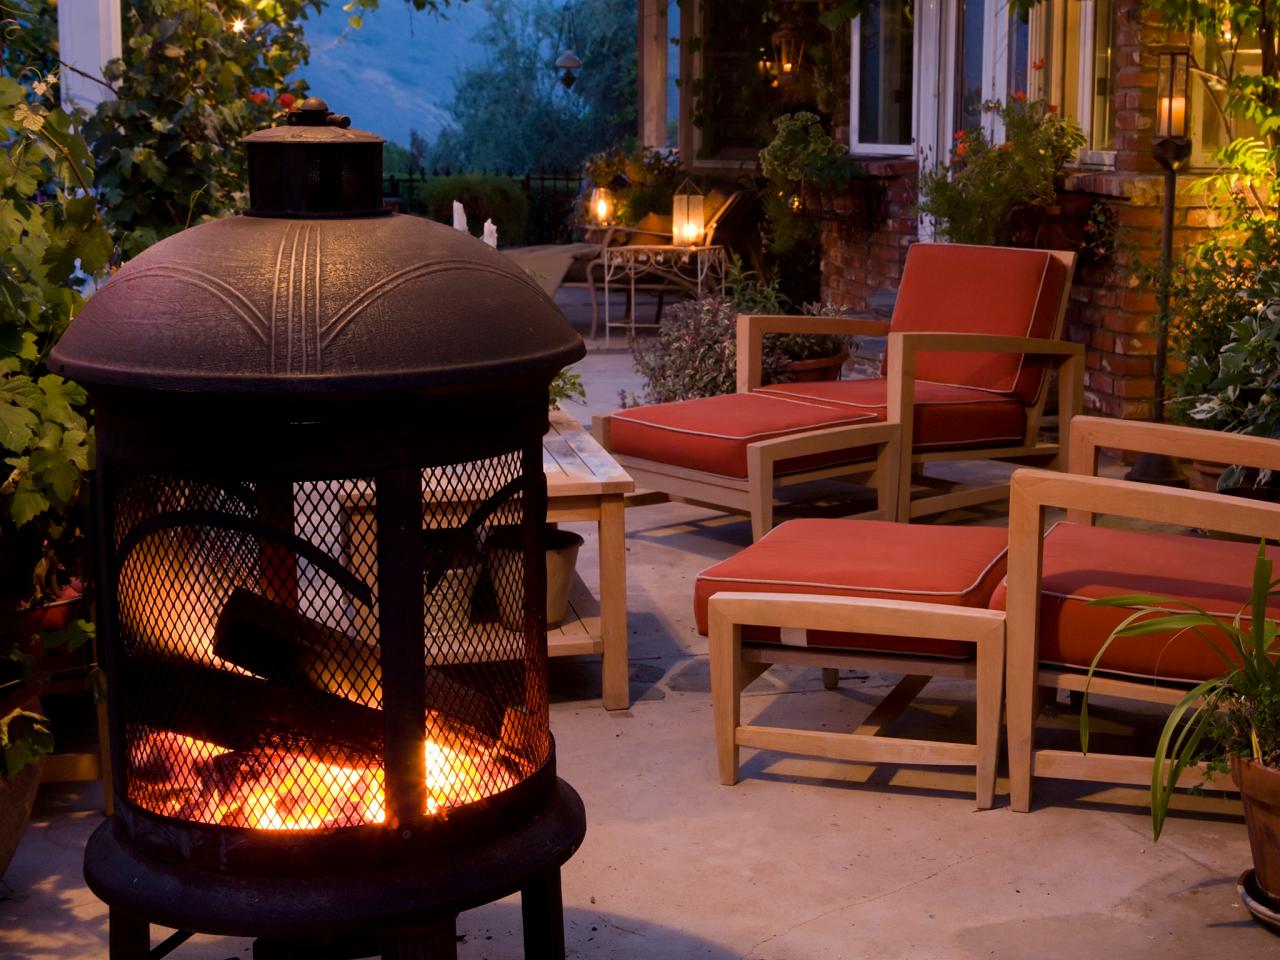 Cast Iron And Steel Fire Pits, How To Clean A Cast Iron Fire Pit